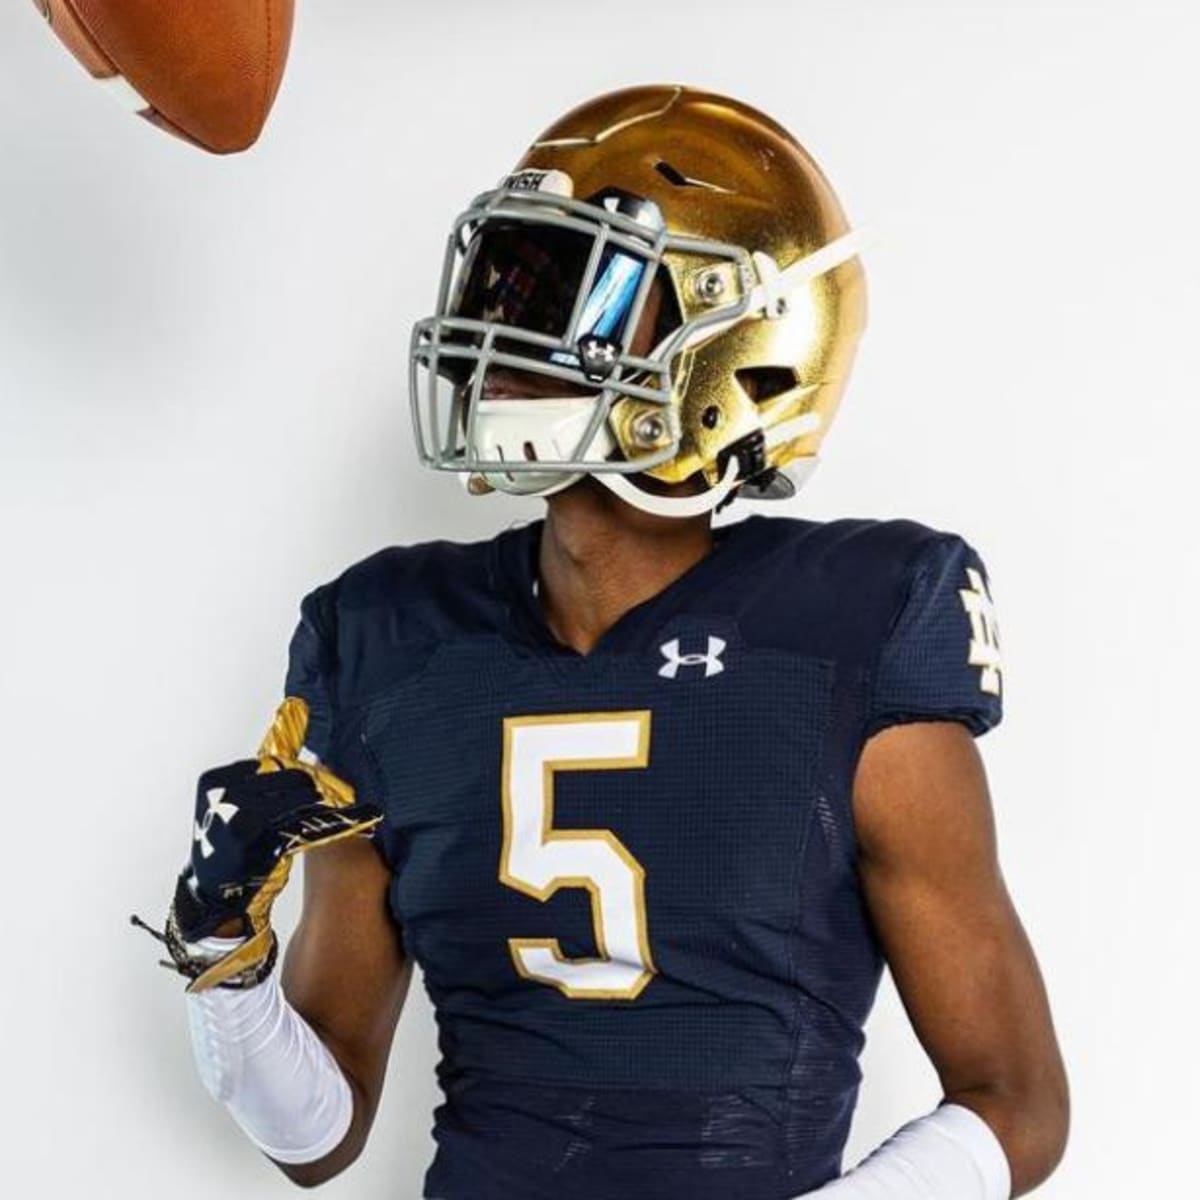 Chat Transcript: Will Notre Dame's investment in WR Merriweather